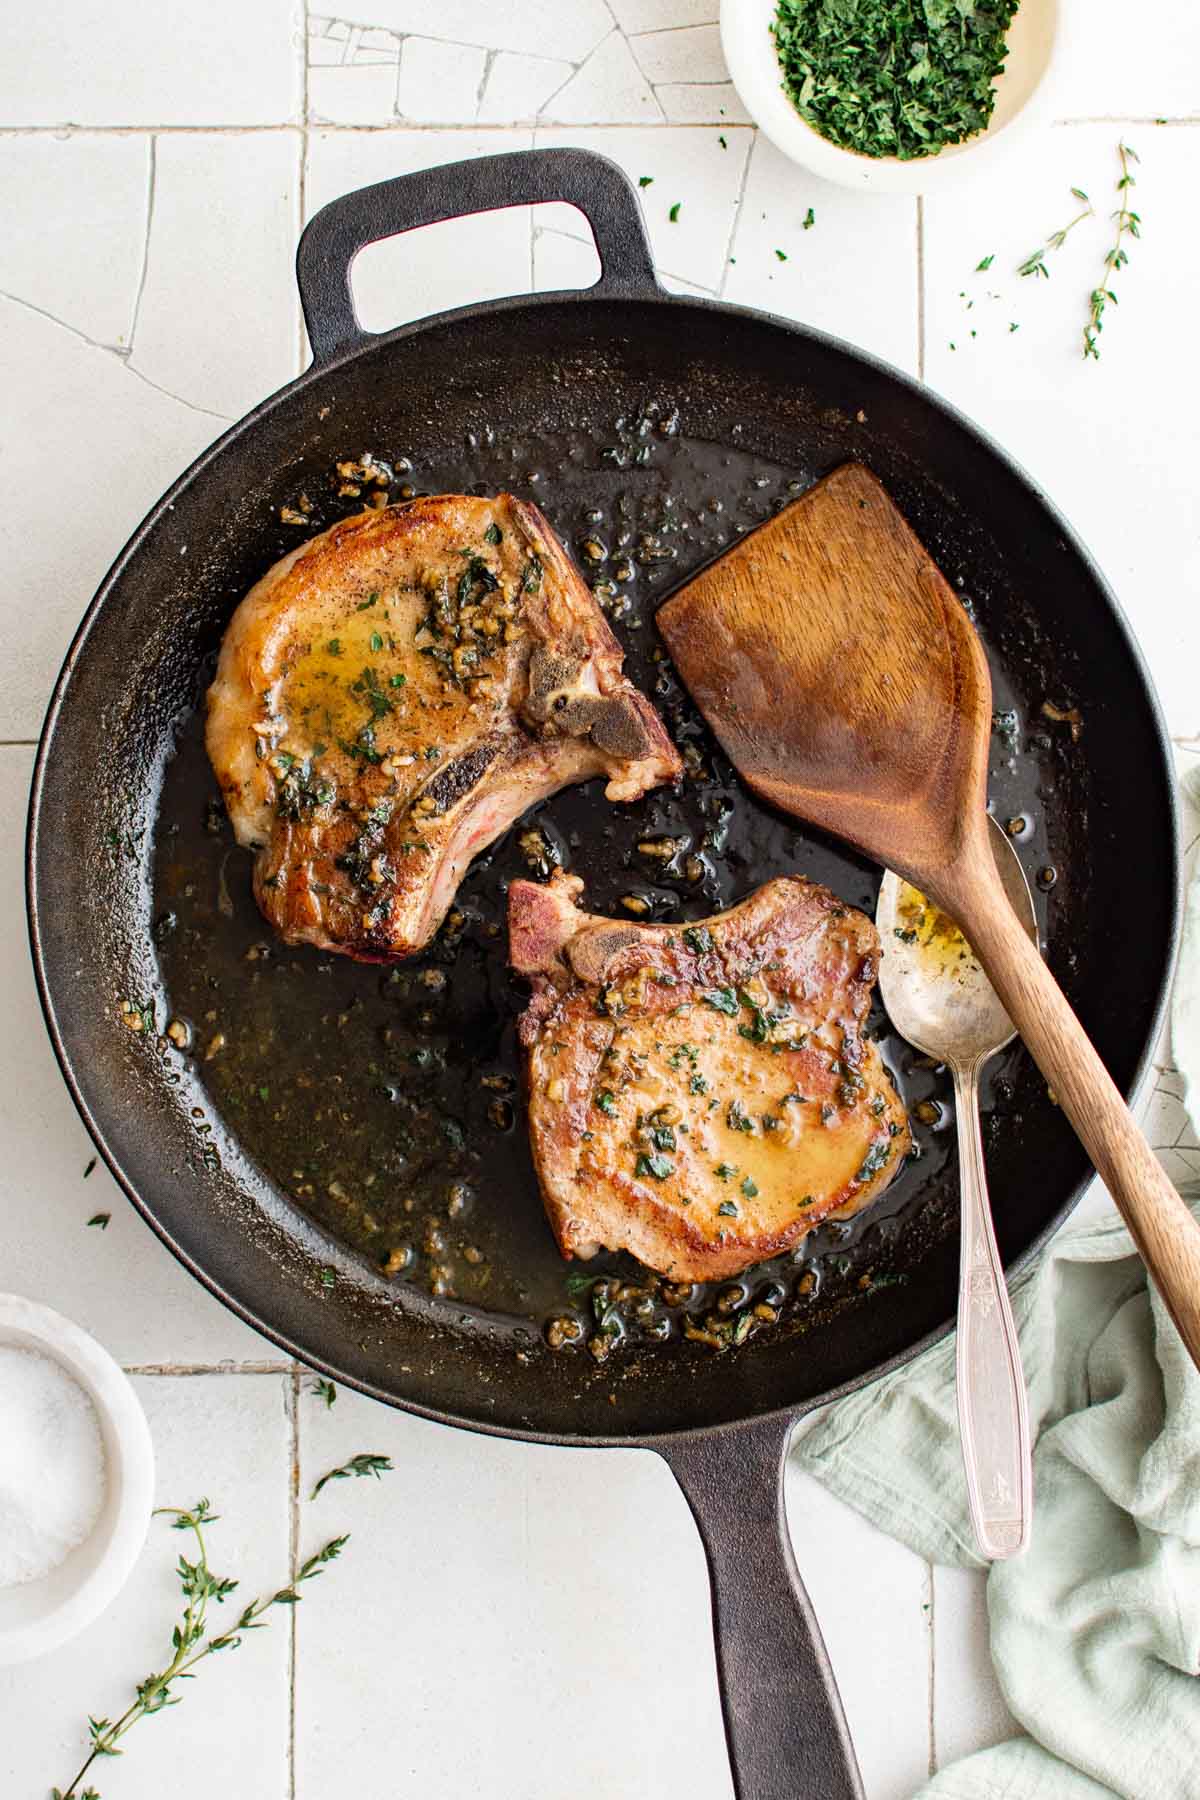 Two bone-in pork chops in a cast iron skillet with a wooden spatula.